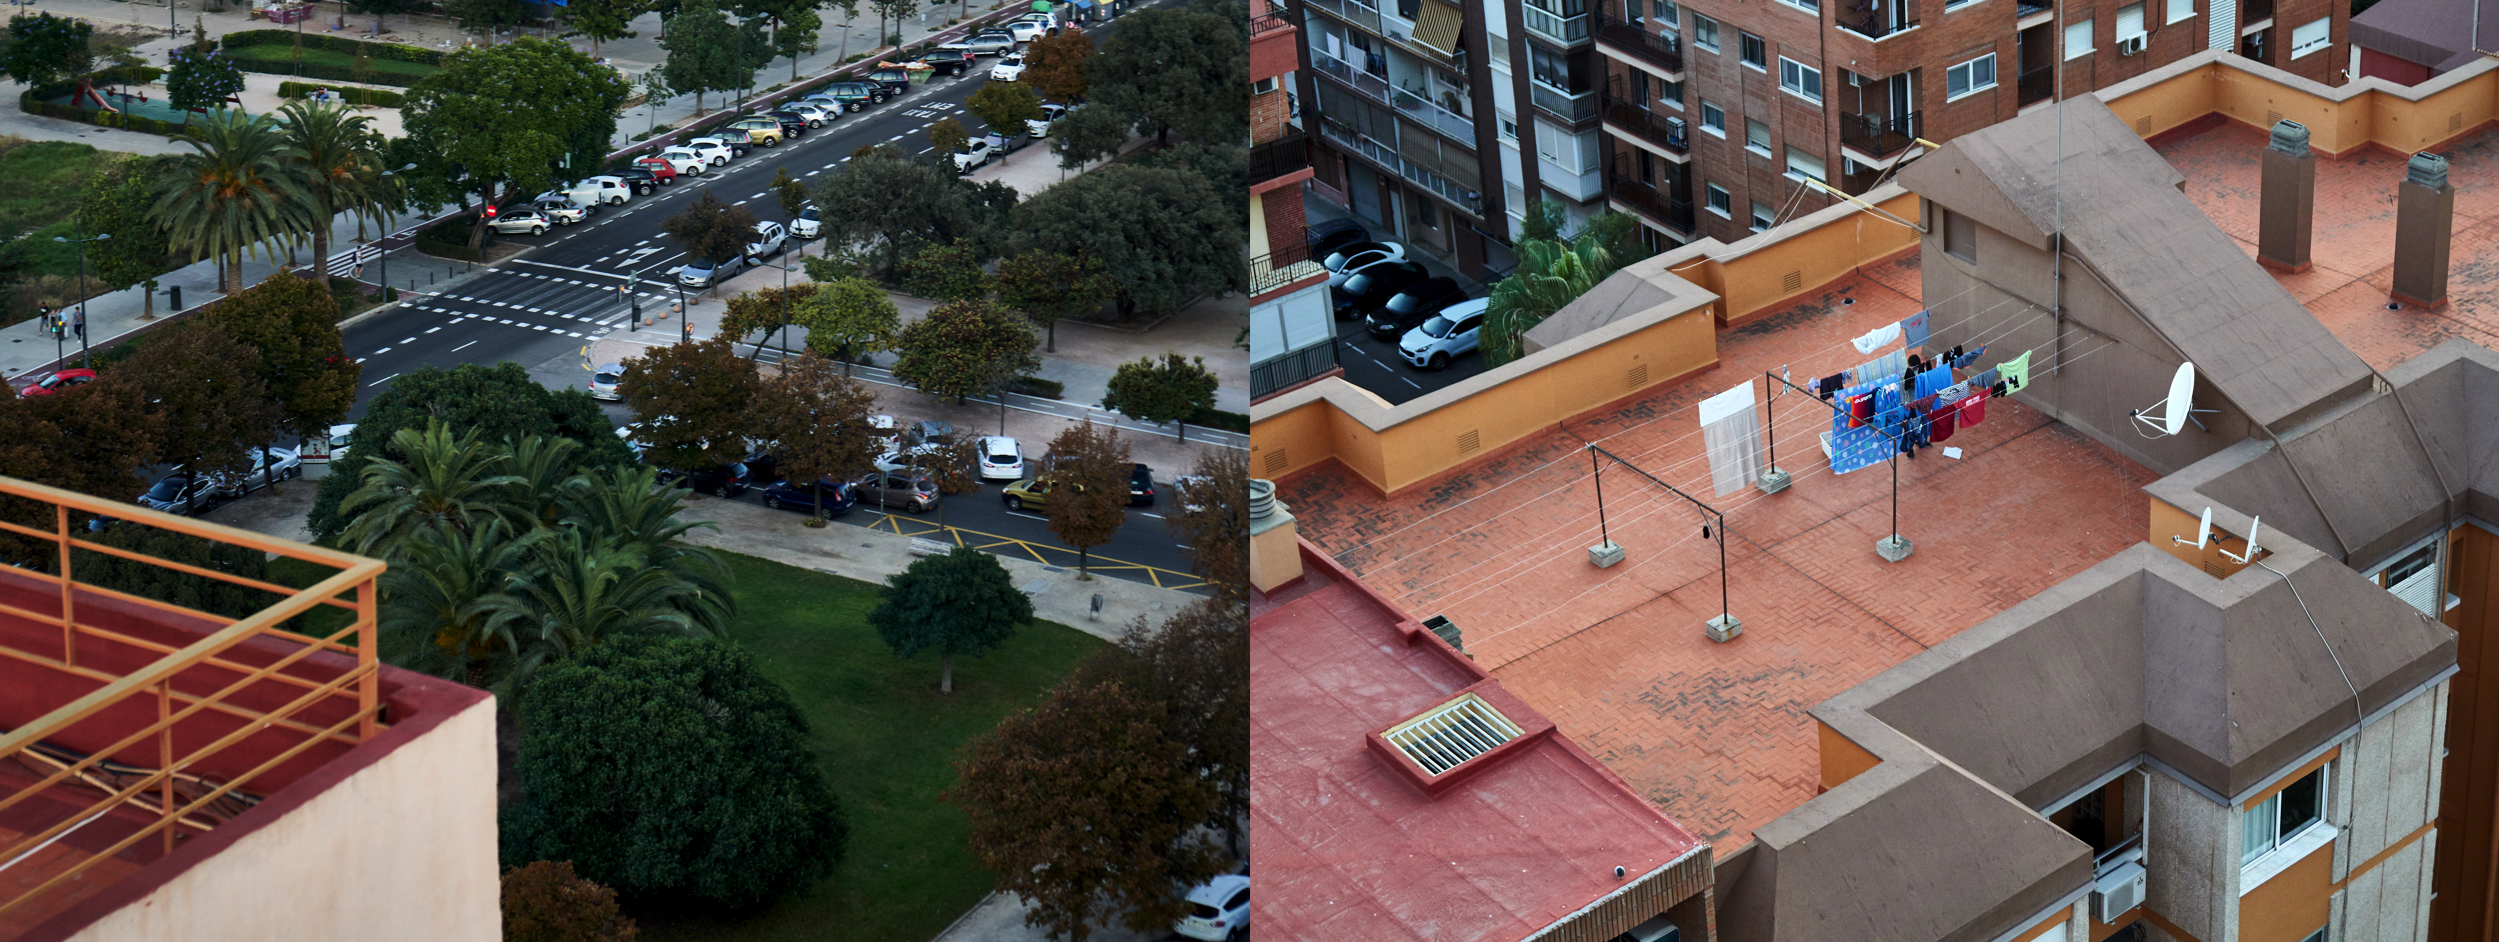 From our high building you can even look down on other roofs